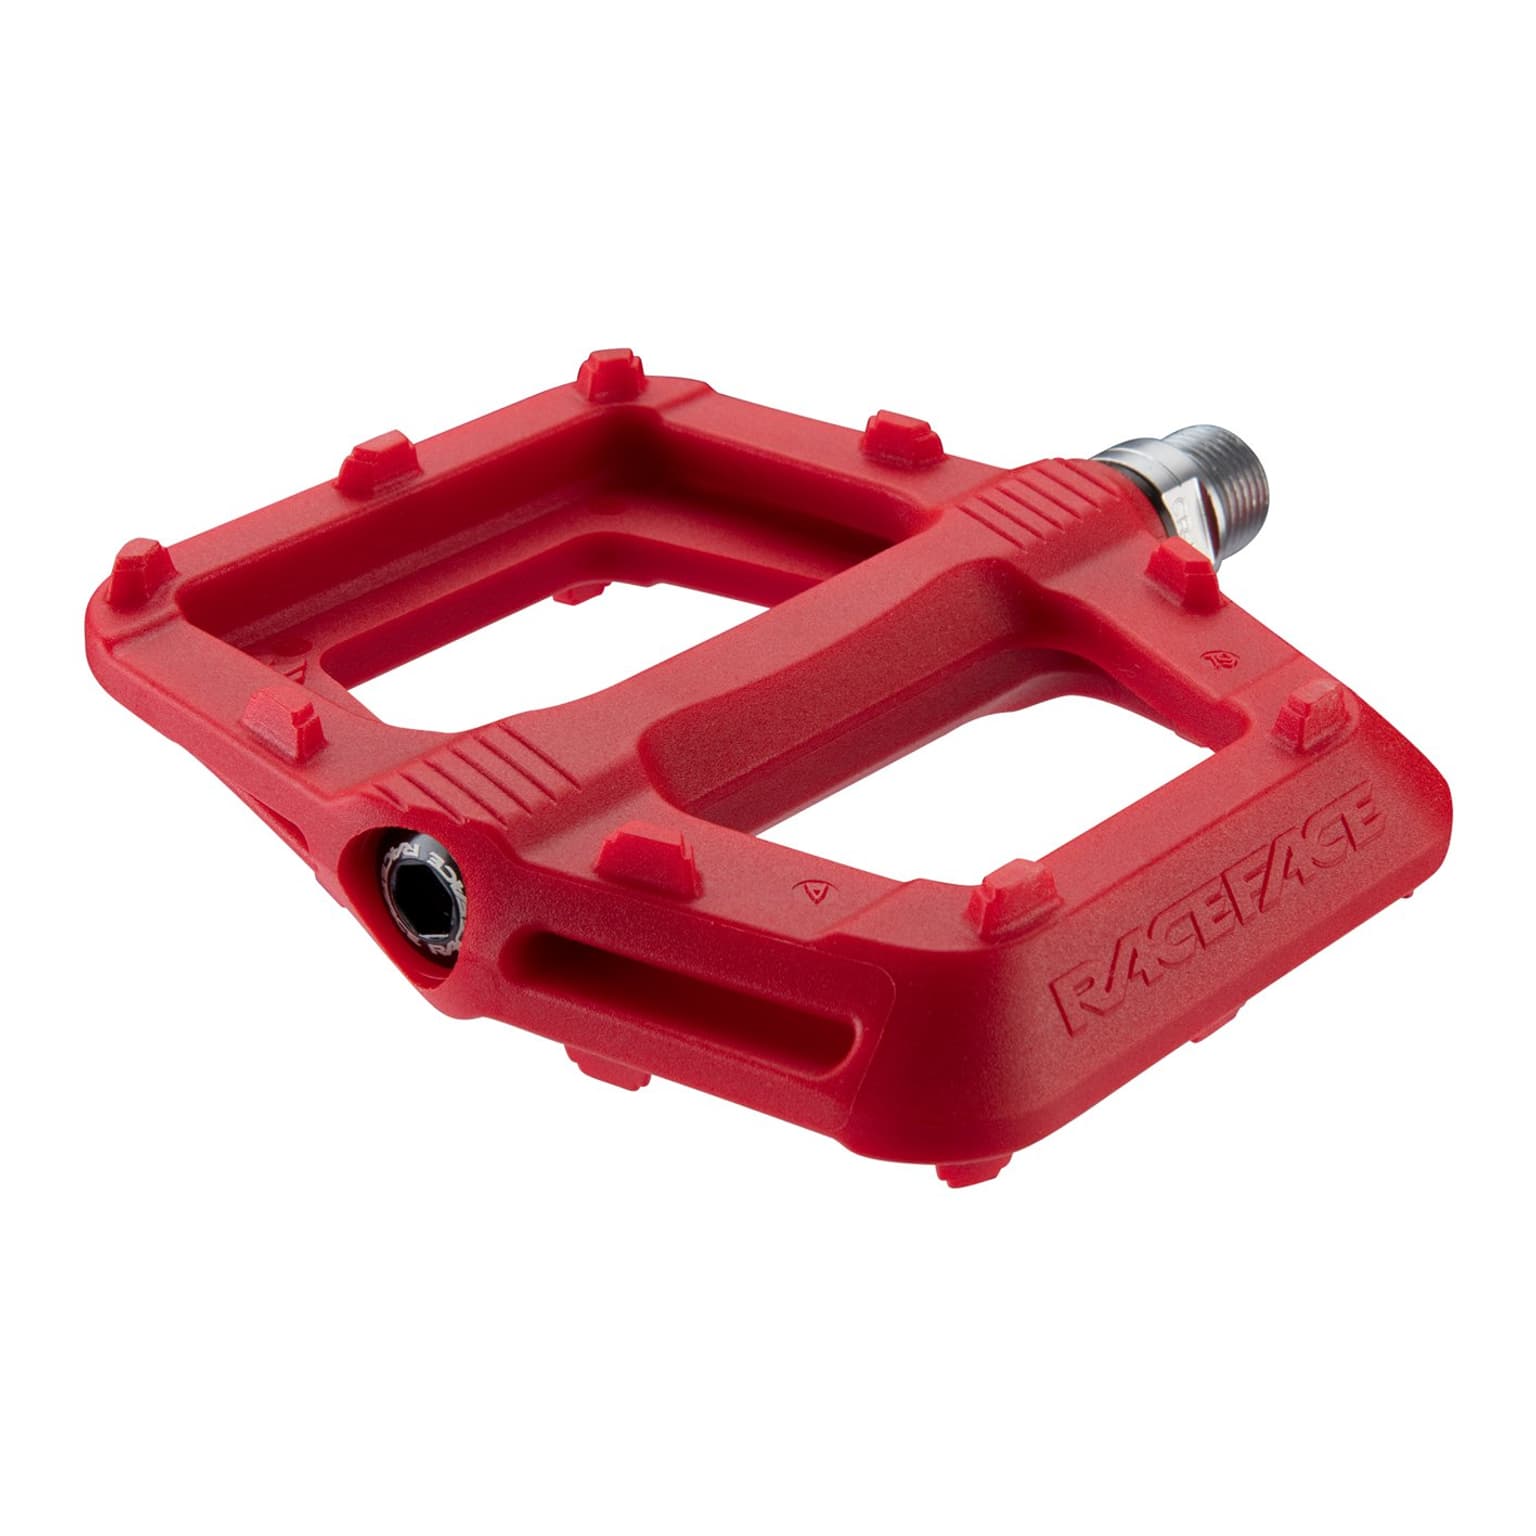 RaceFace RaceFace Ride Pedal Pedale rosso 1